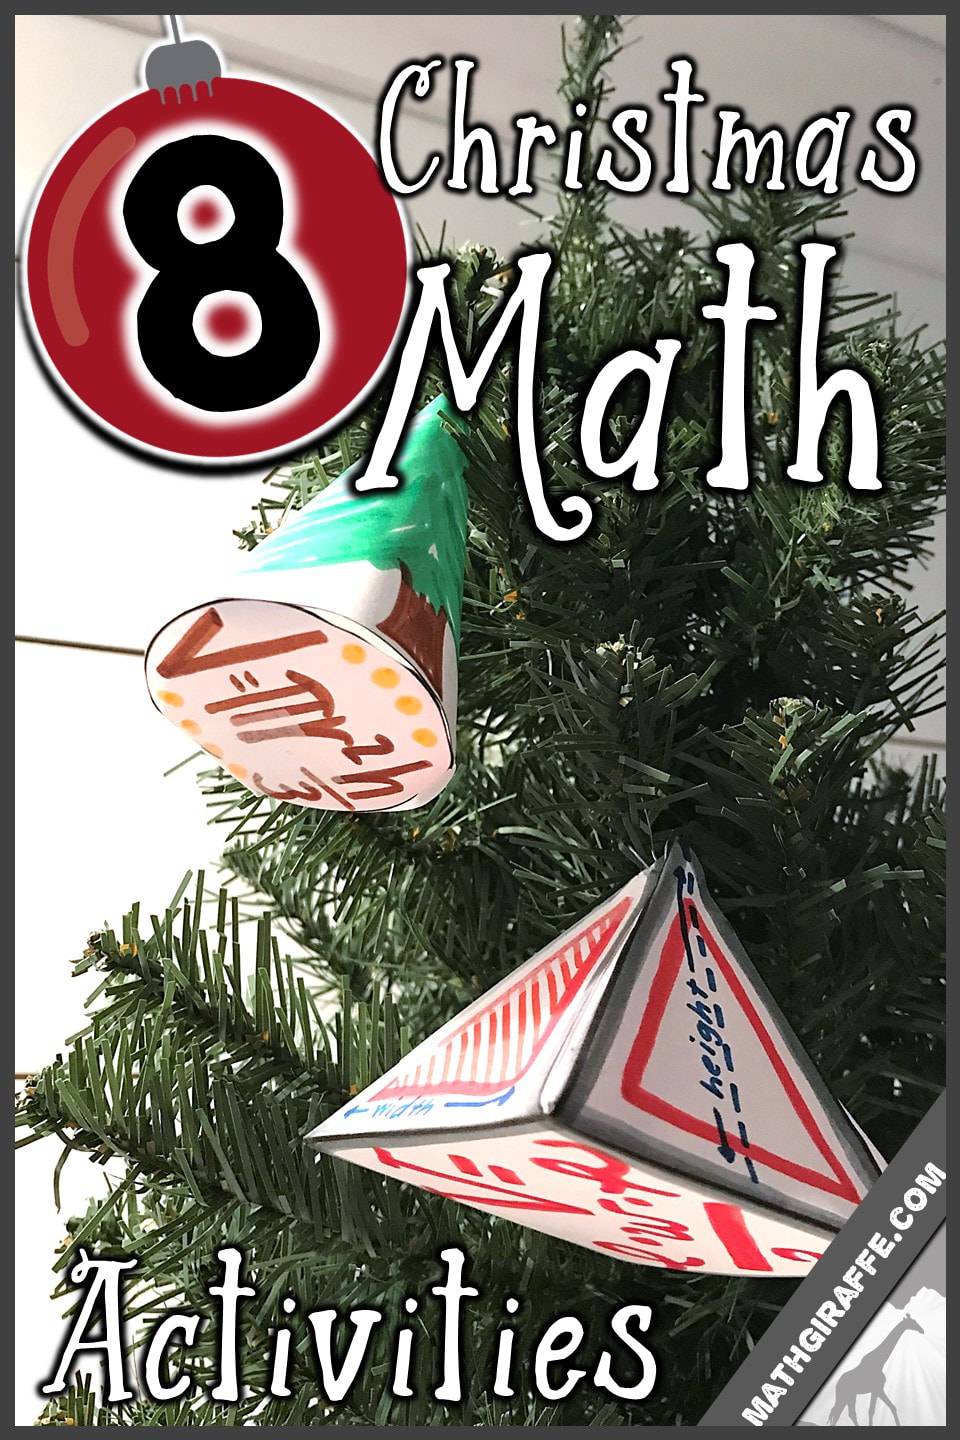 Geometry & Algebra activities that cover the math standards while celebrating Christmas